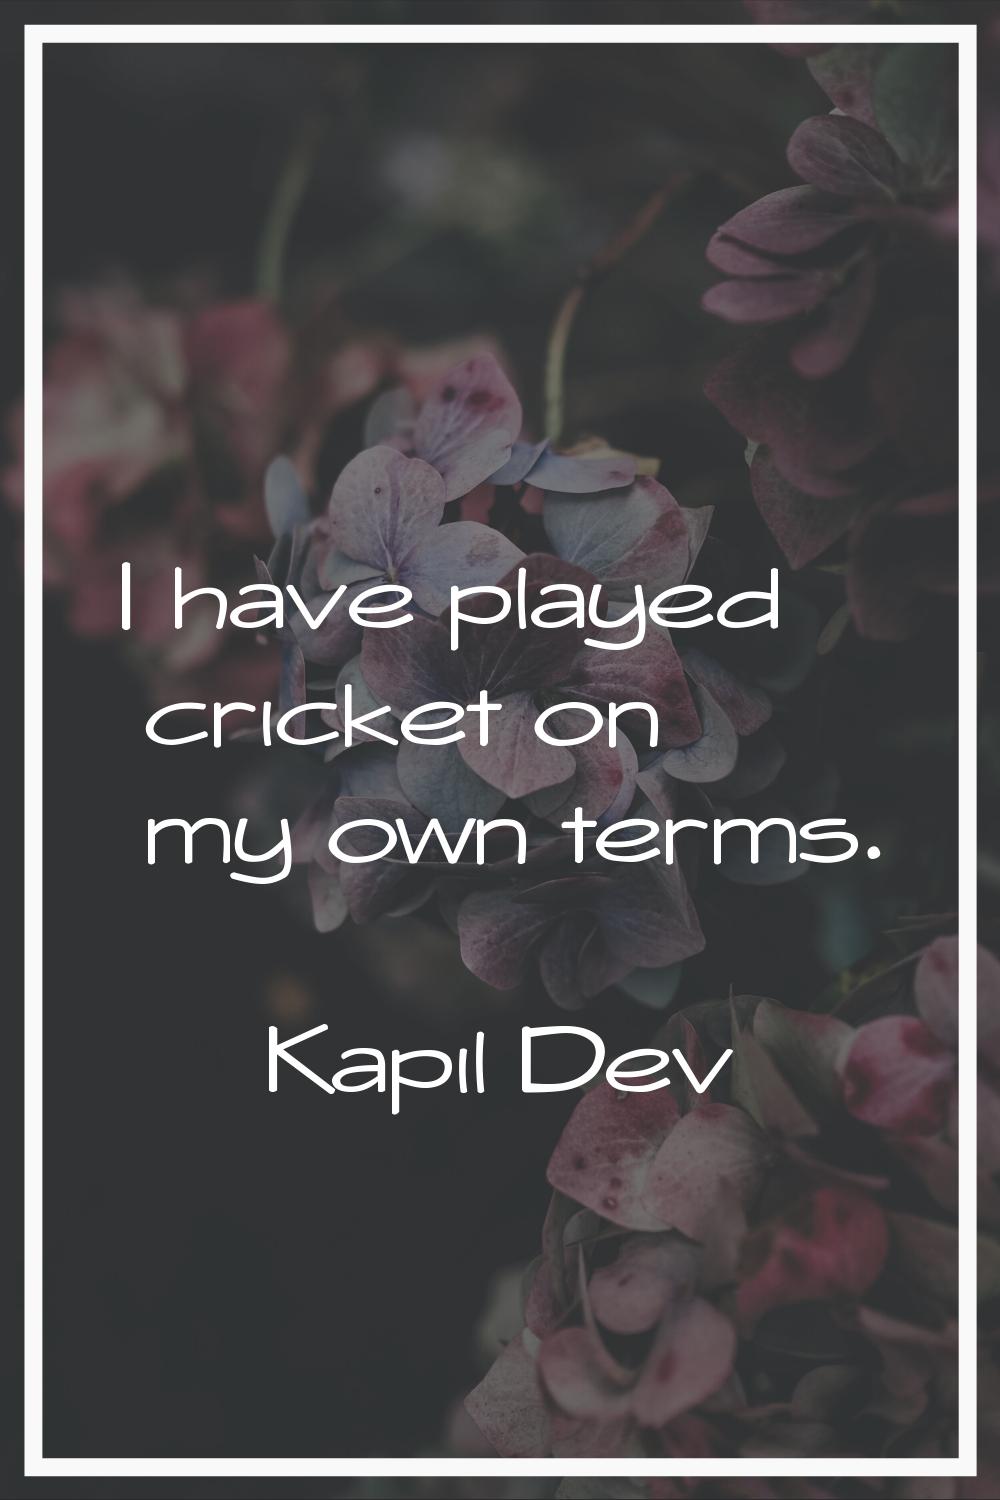 I have played cricket on my own terms.